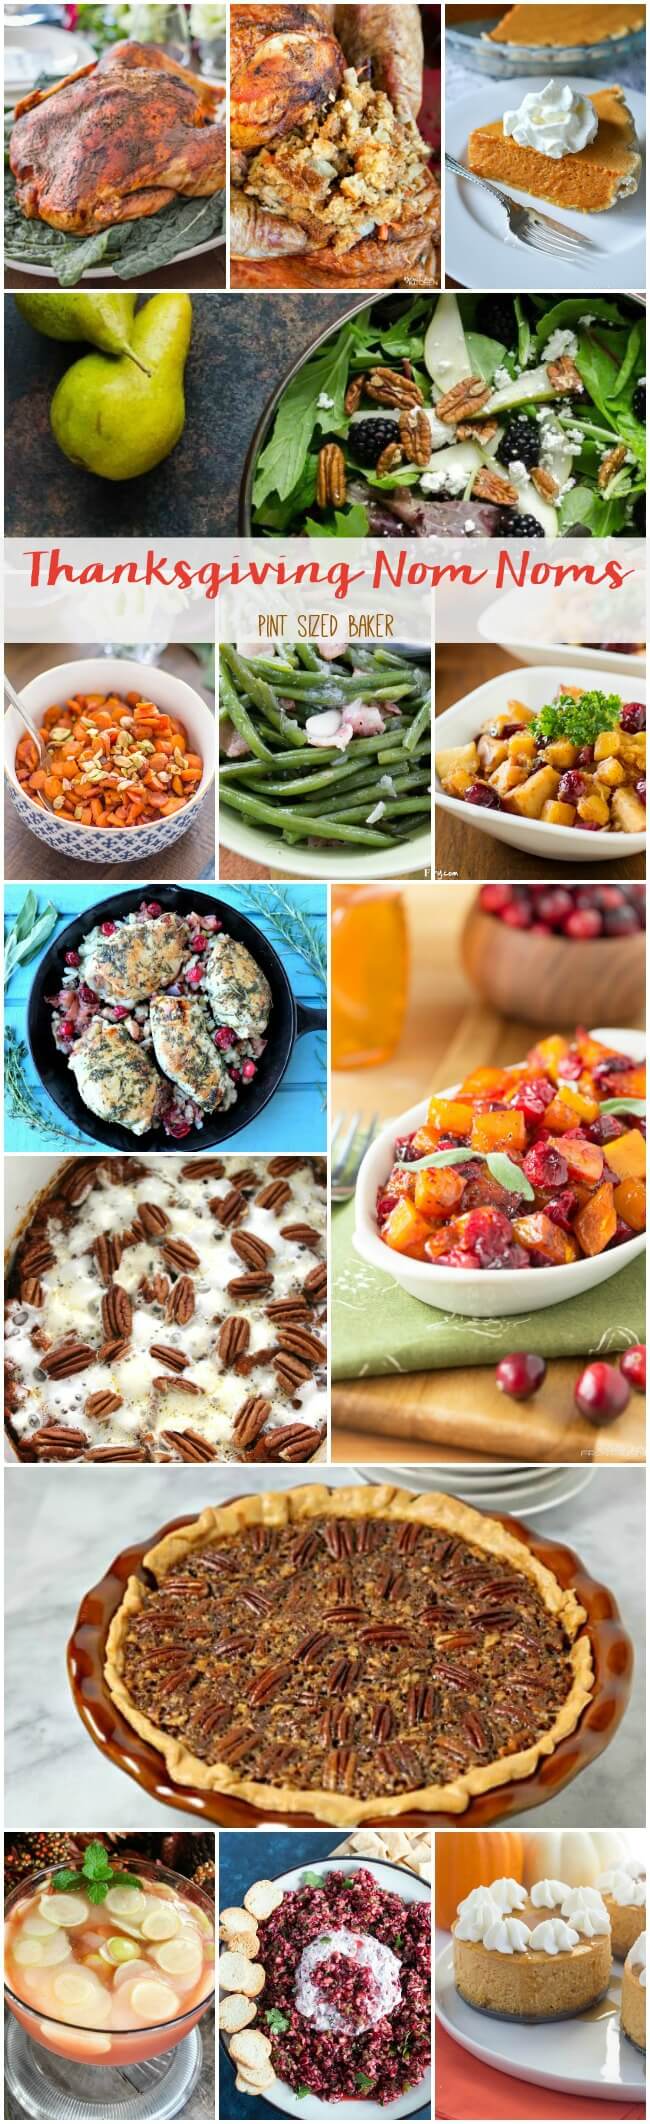 I've got all the Thanksgiving Nom Noms here for your menu. The perfect Turkey, stuffing, salad, potatoes, green beans and pumpkin pie! YUM!